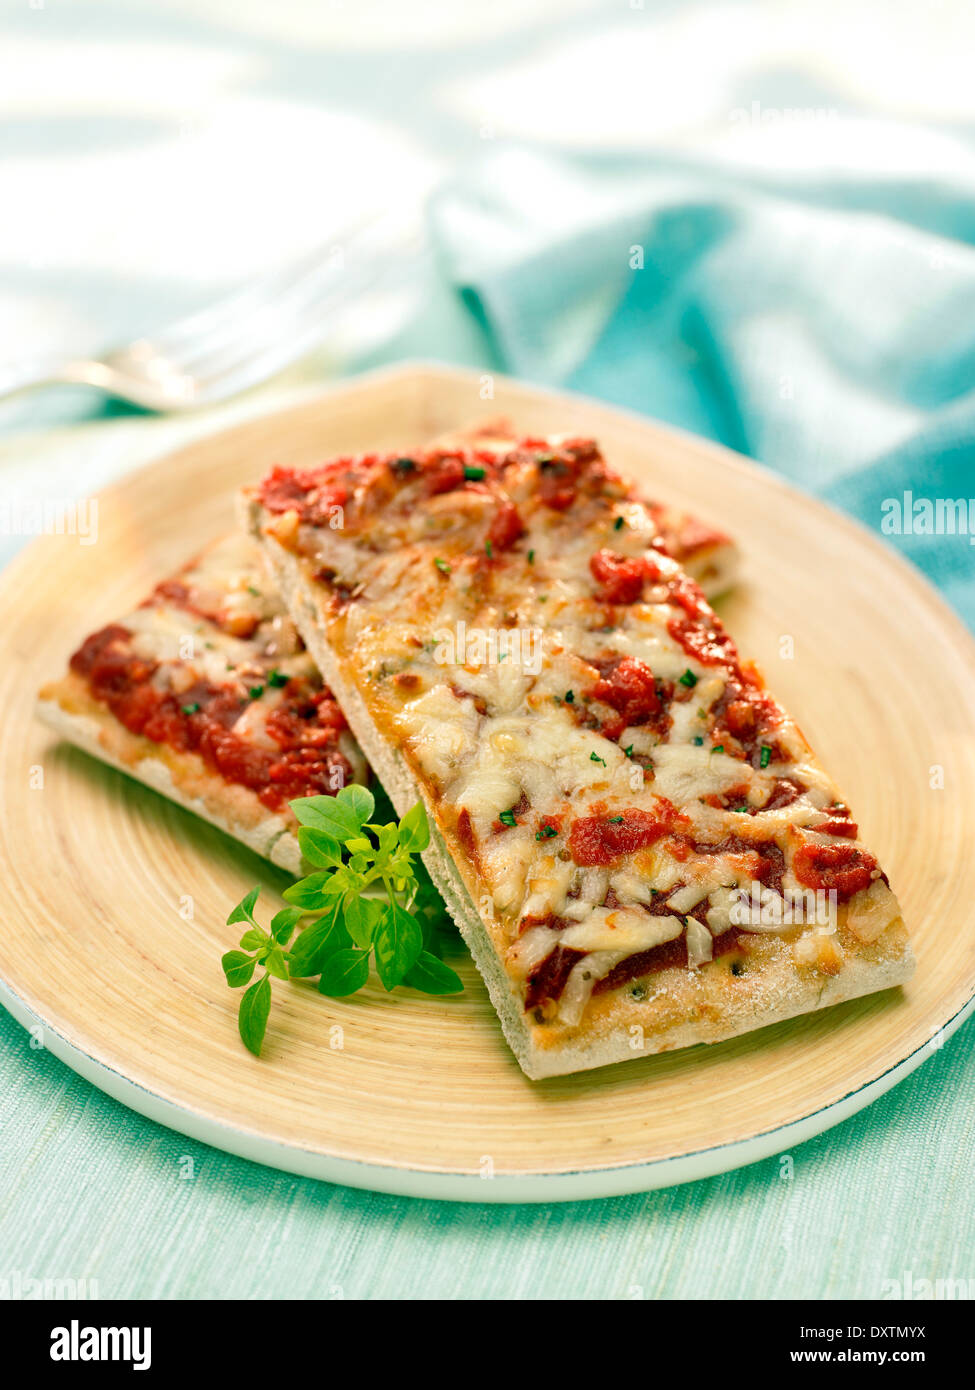 Portions of pizza Stock Photo